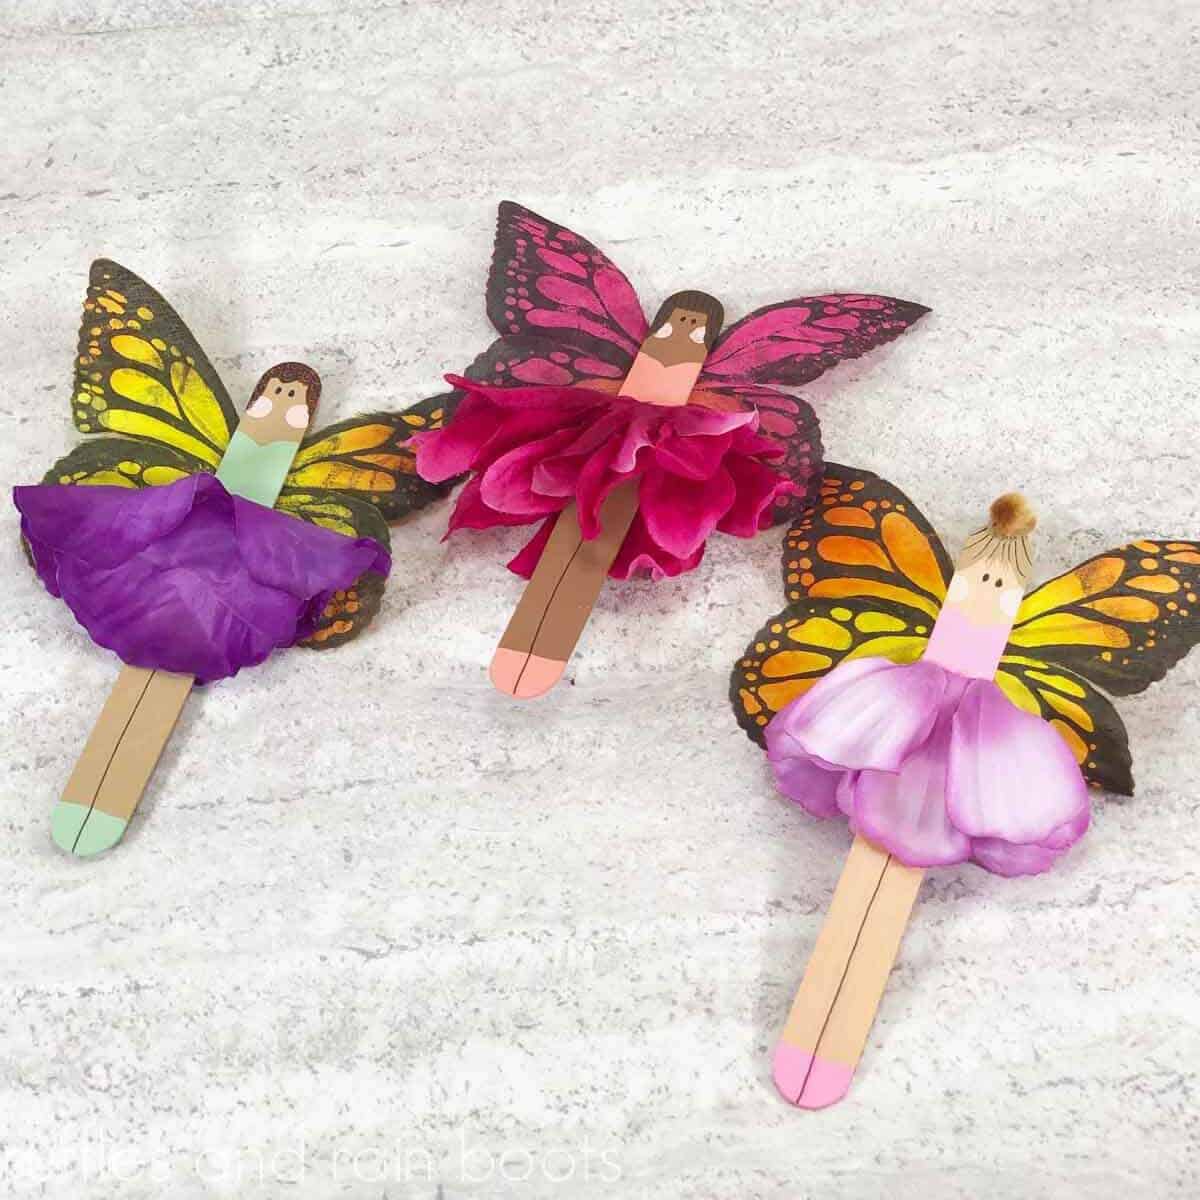 Square close up image of three craft stick fairies with flower skirts and butterfly wings on a light concrete background.